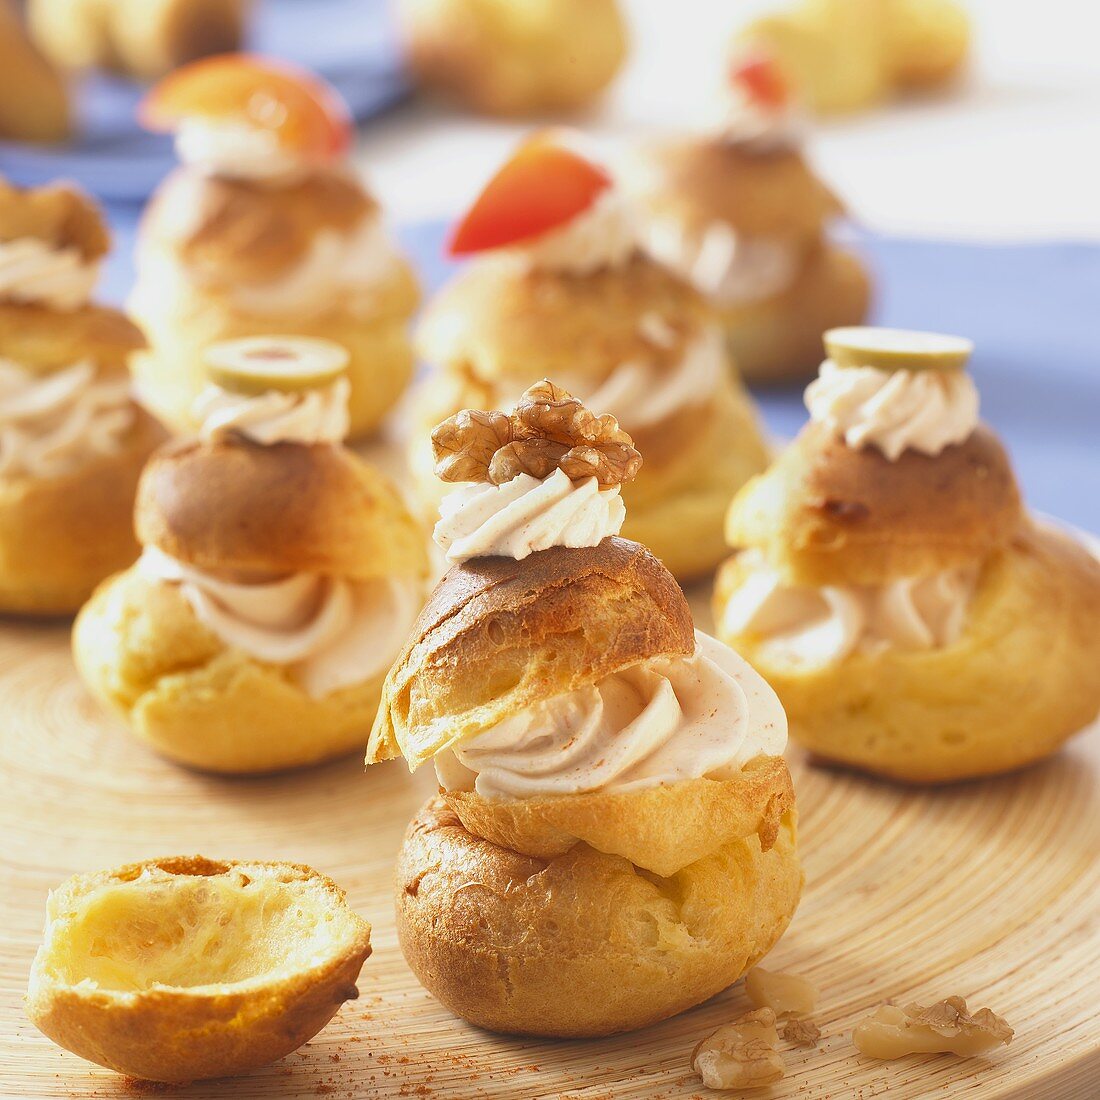 Savoury profiteroles with cheese cream filling